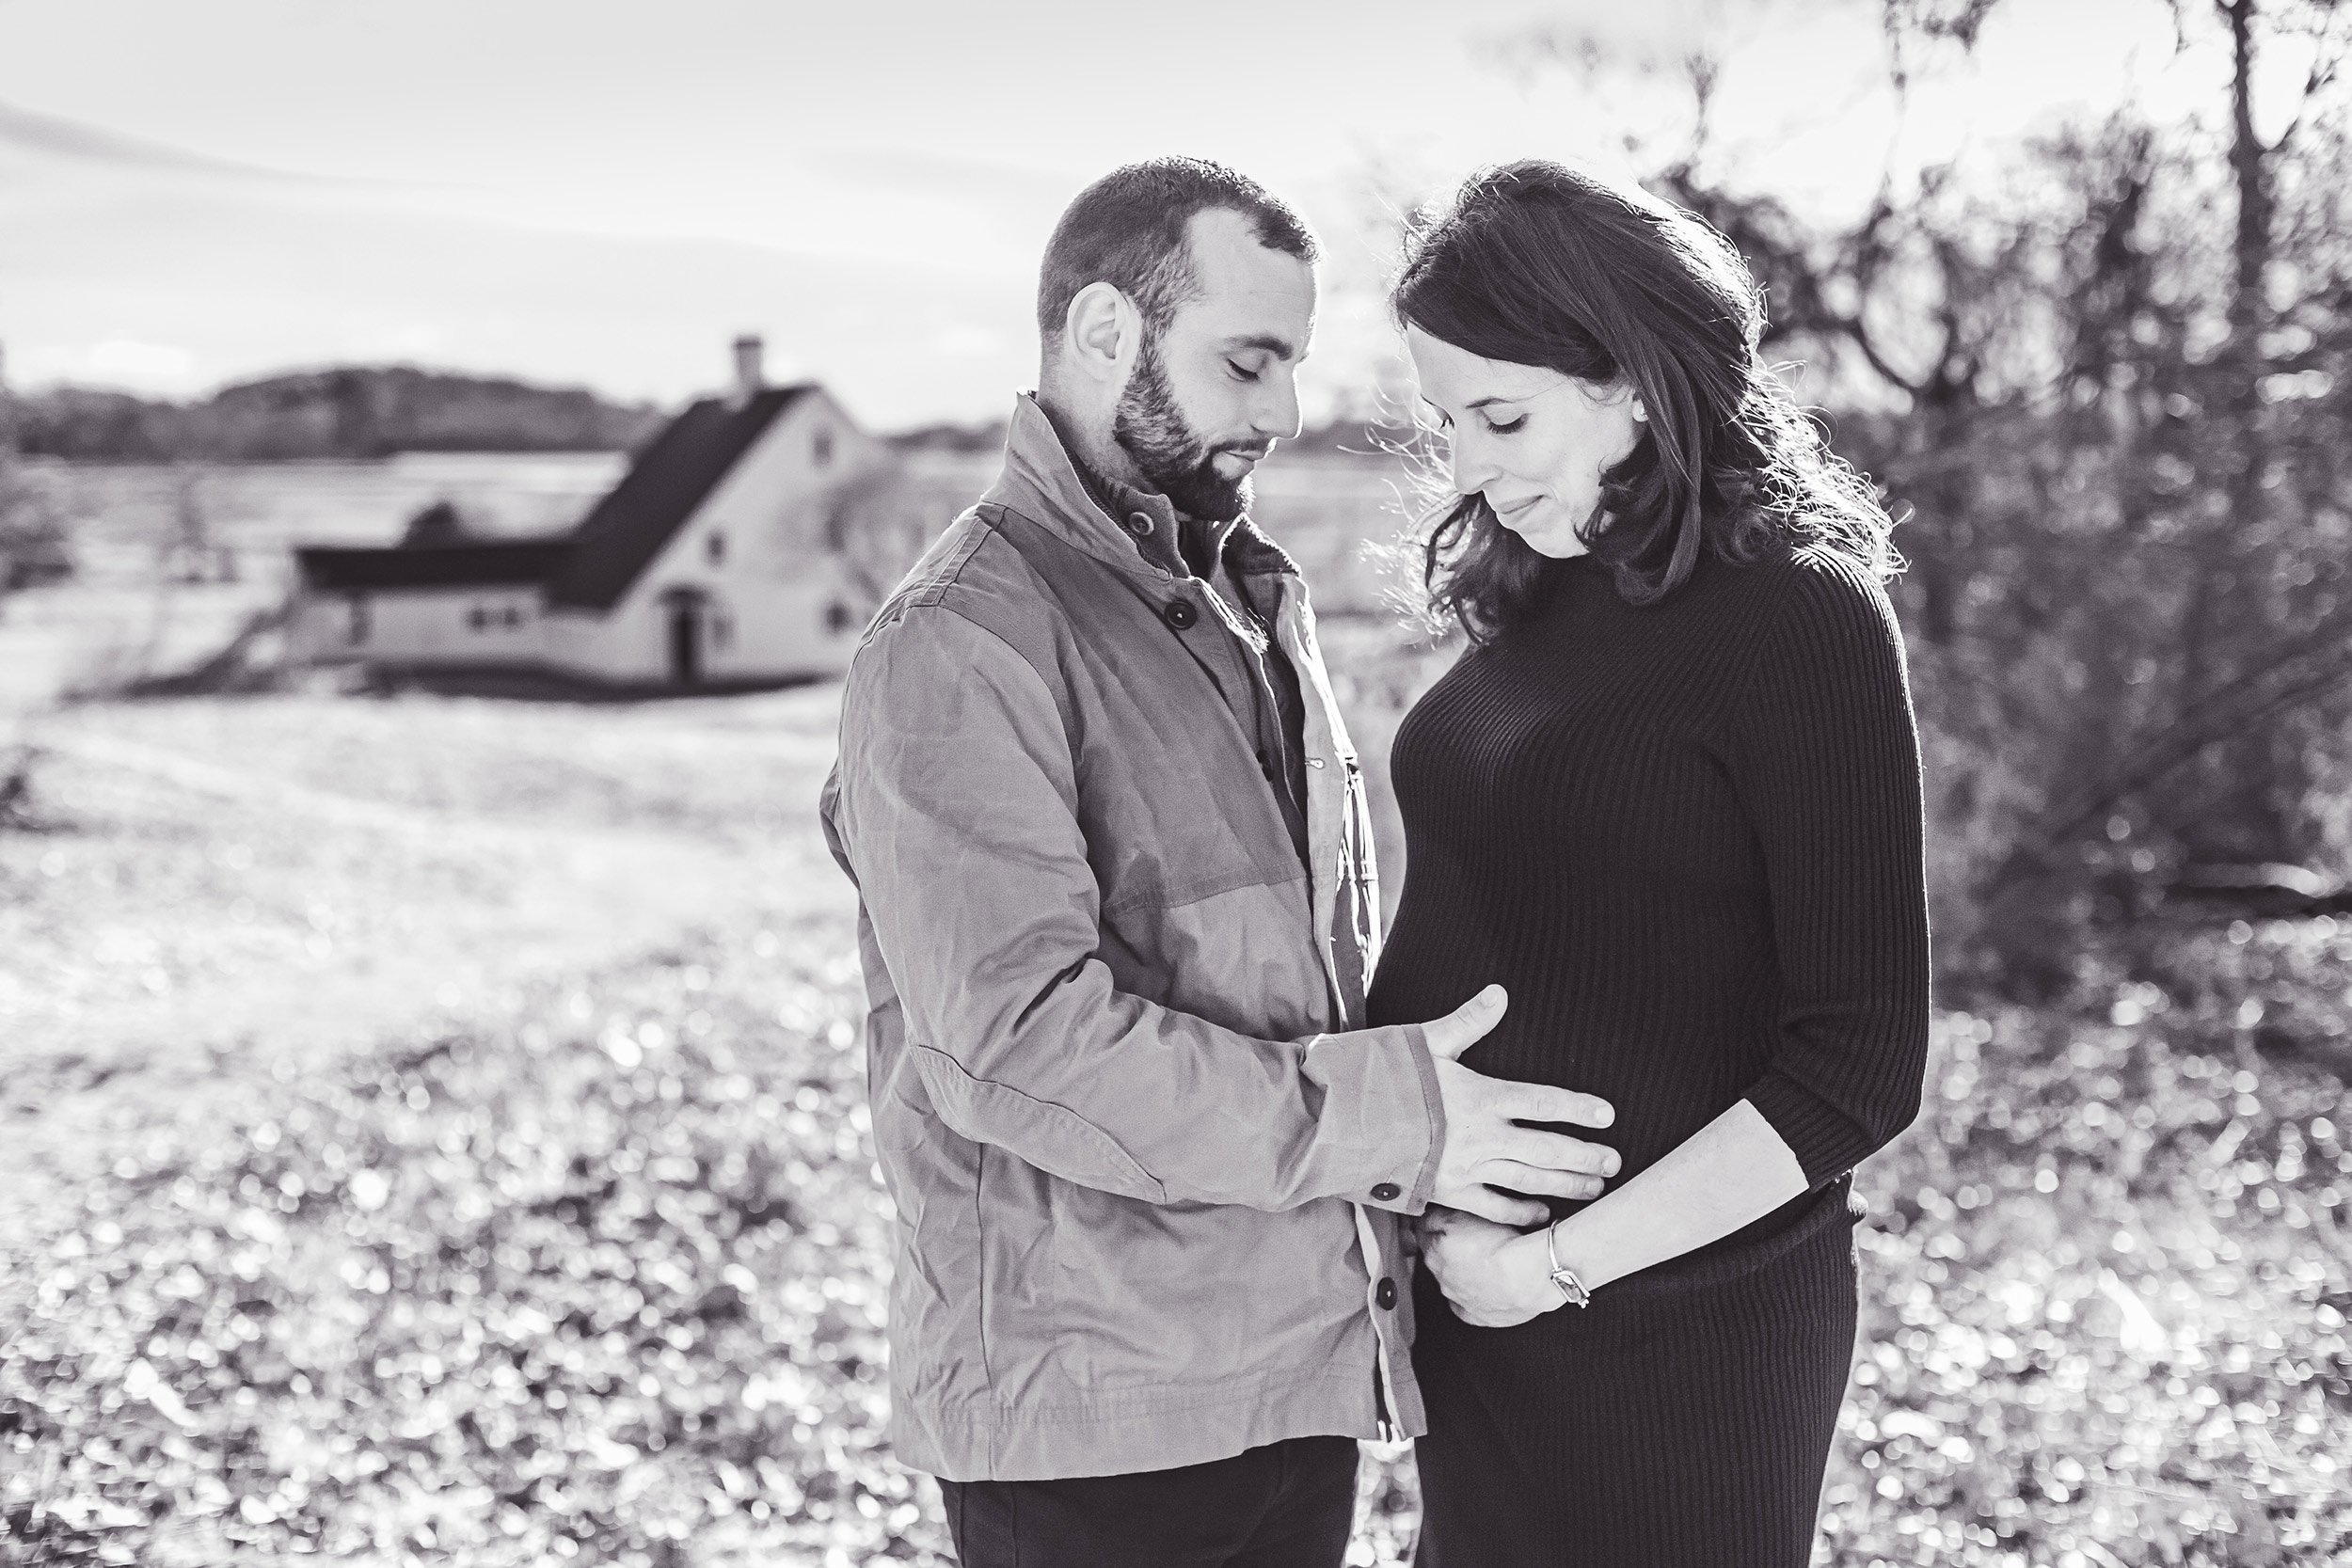 Ipswich Strawberry Hill Maternity Portrait Session - Stephen Grant Photography